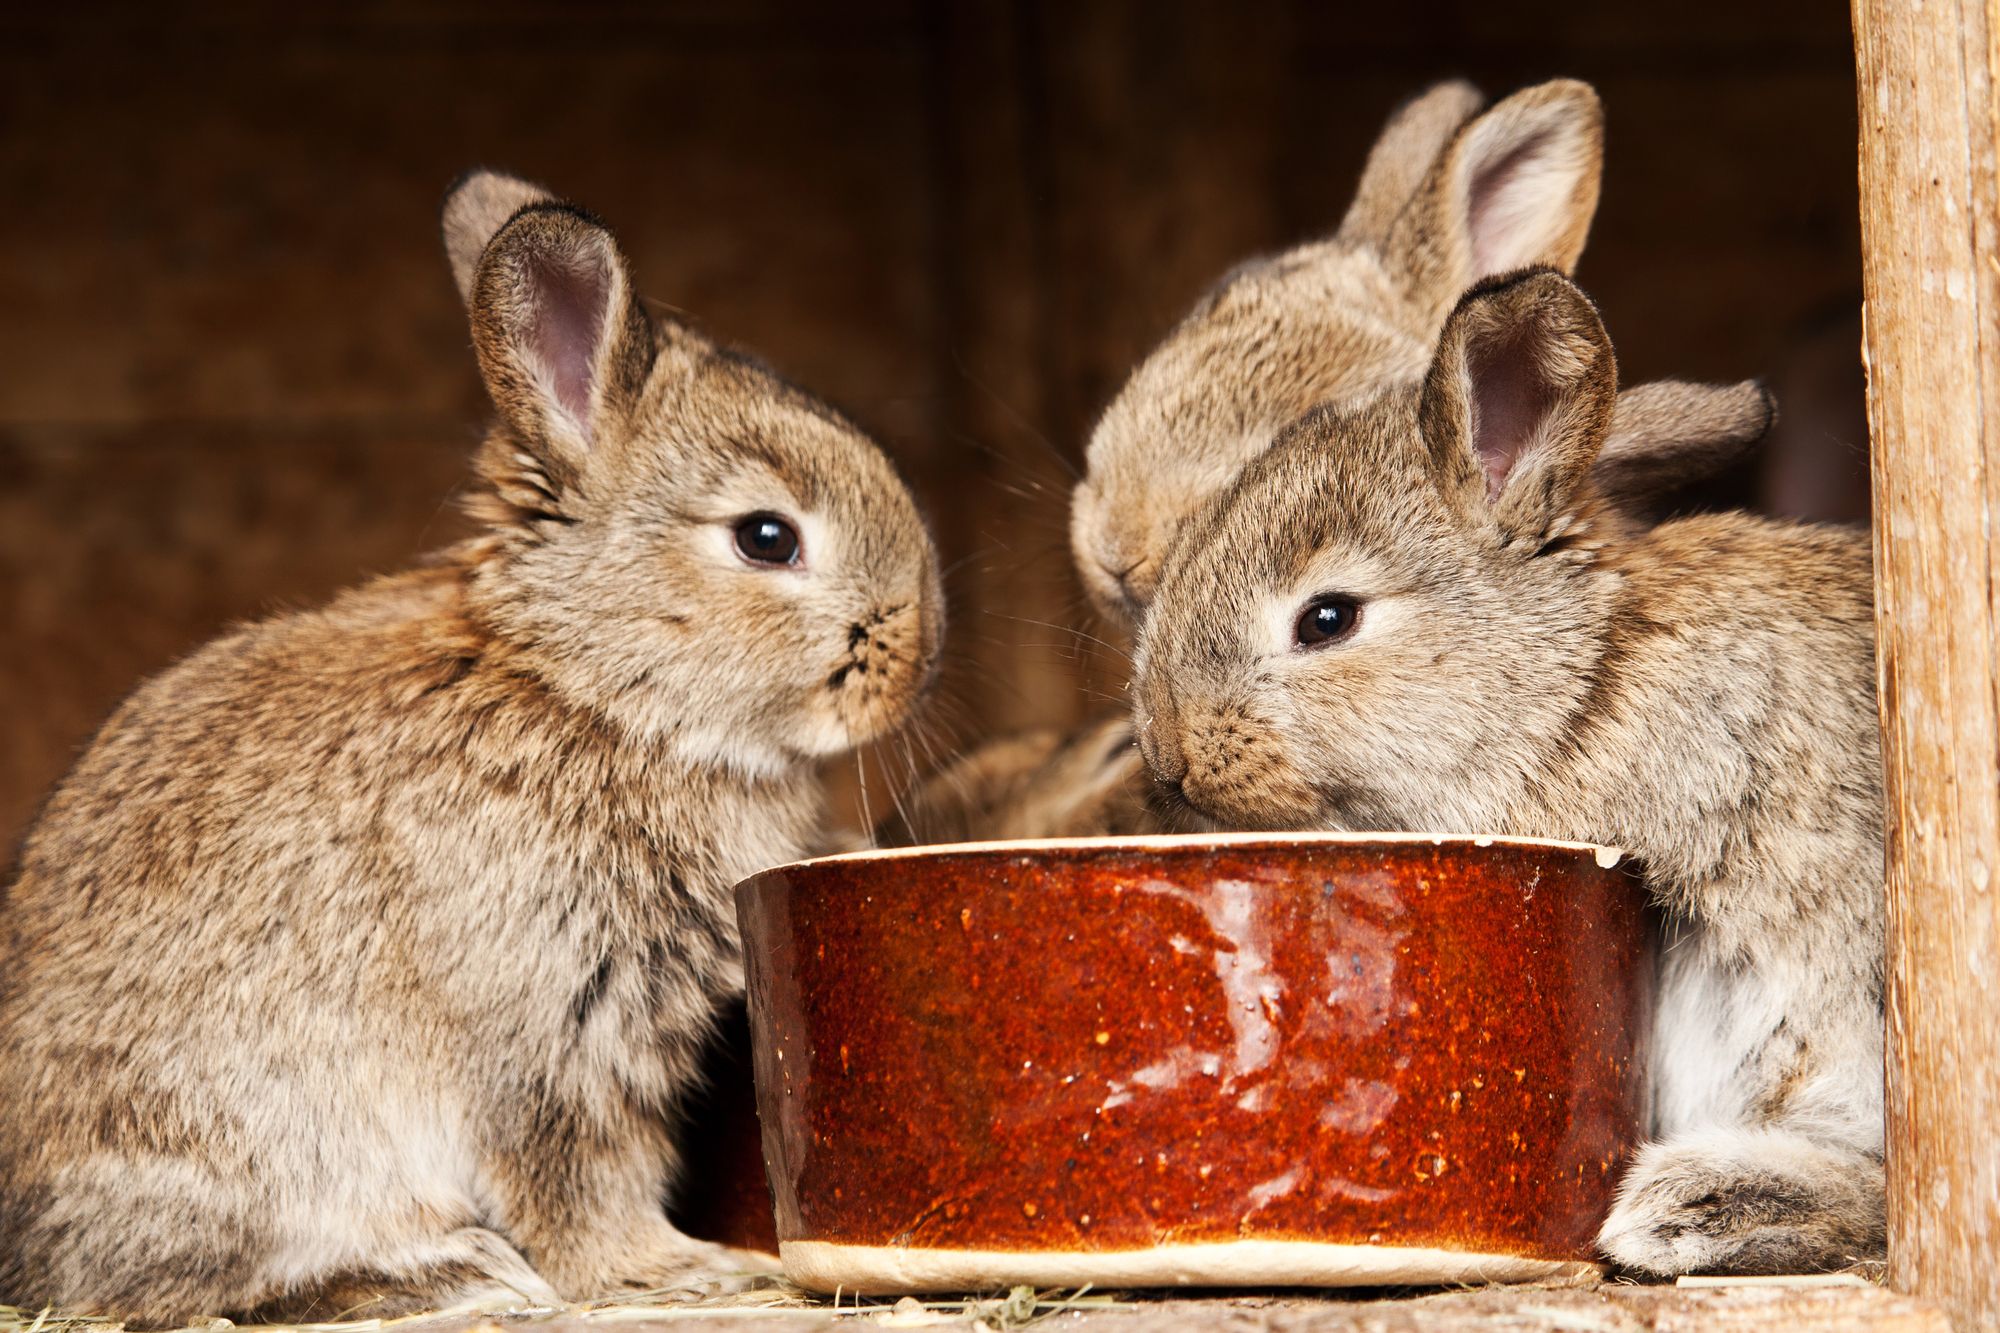 Three rabbits eat from a red bowl - Manna pro